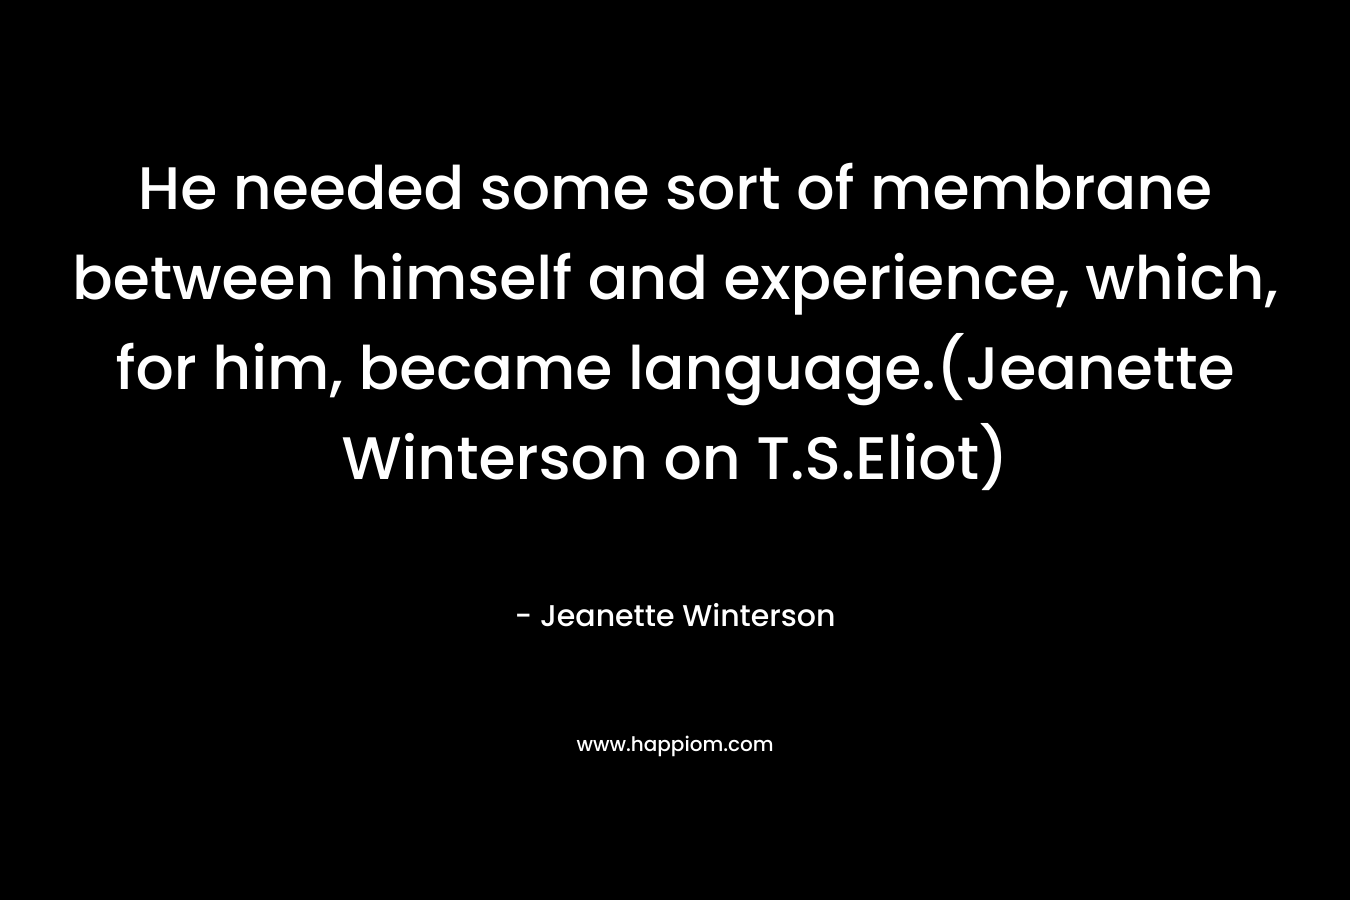 He needed some sort of membrane between himself and experience, which, for him, became language.(Jeanette Winterson on T.S.Eliot)